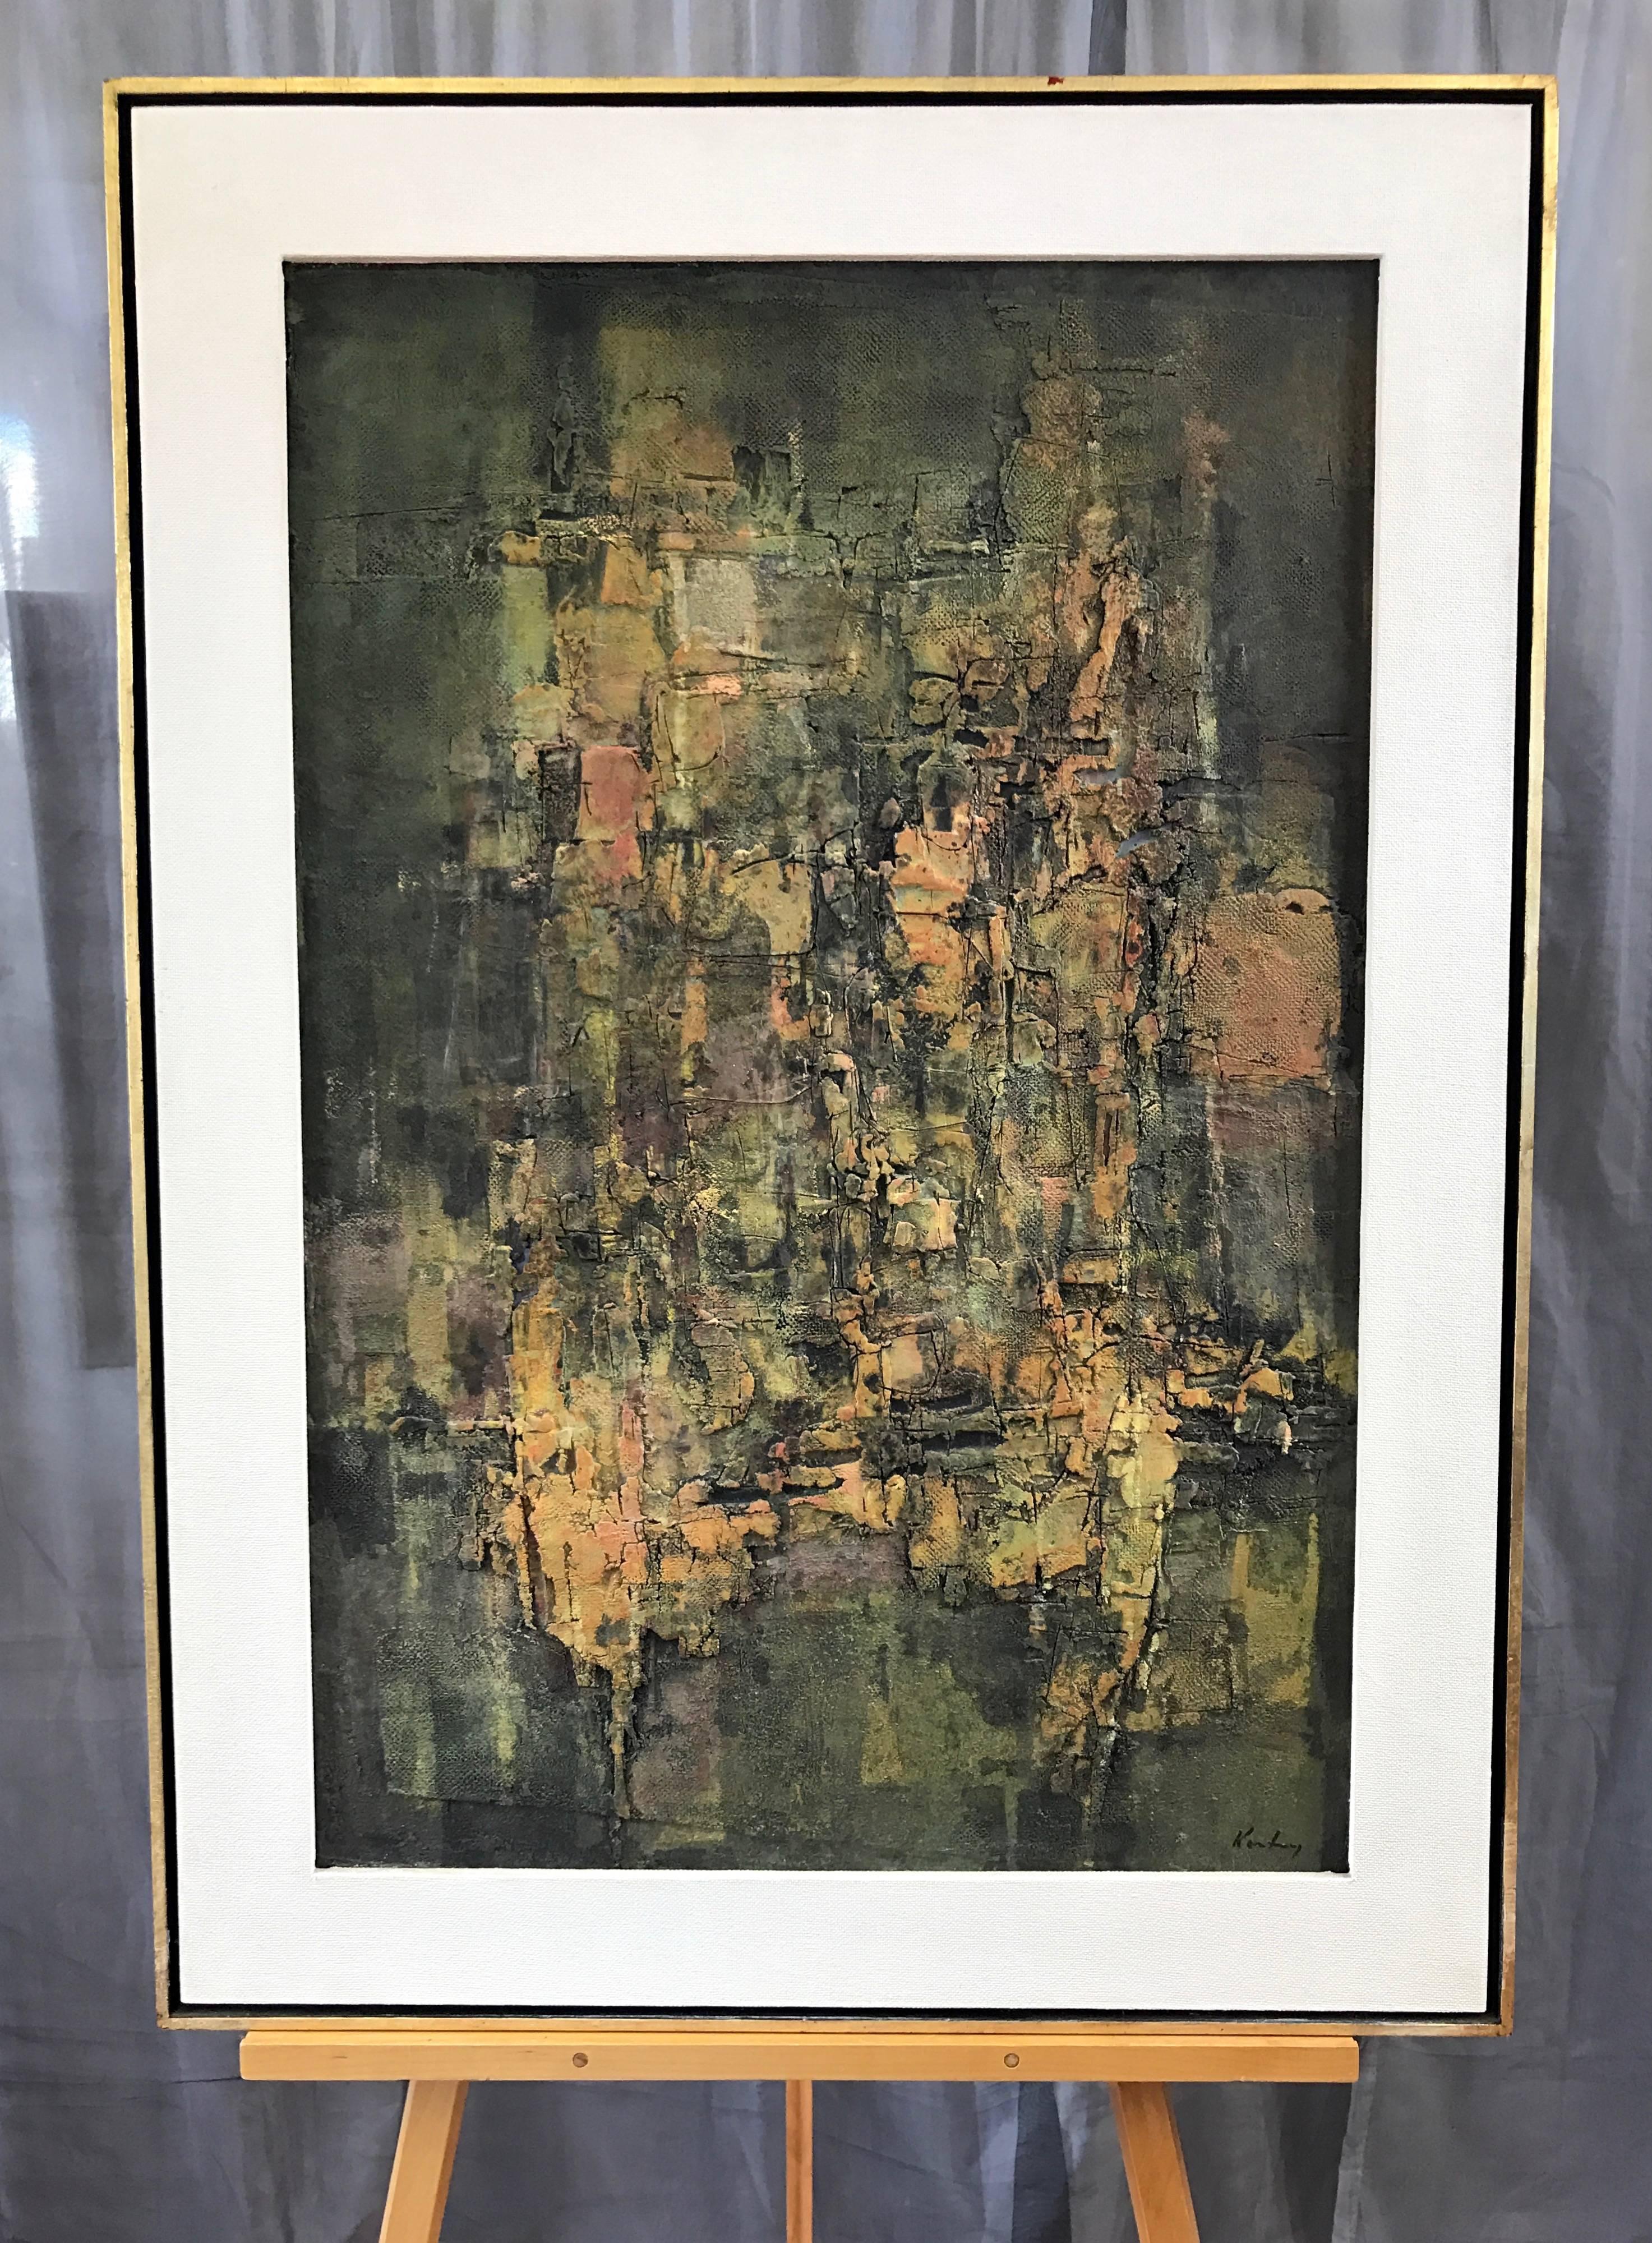 A textural abstract oil painting by widely-exhibited Polish-American artist Pawel “Paul” August Kontny (1926–2000).

An excellent example of Kontny’s signature technique, involving thickly sculpted marble dust paste on gessoed masonite with an oil